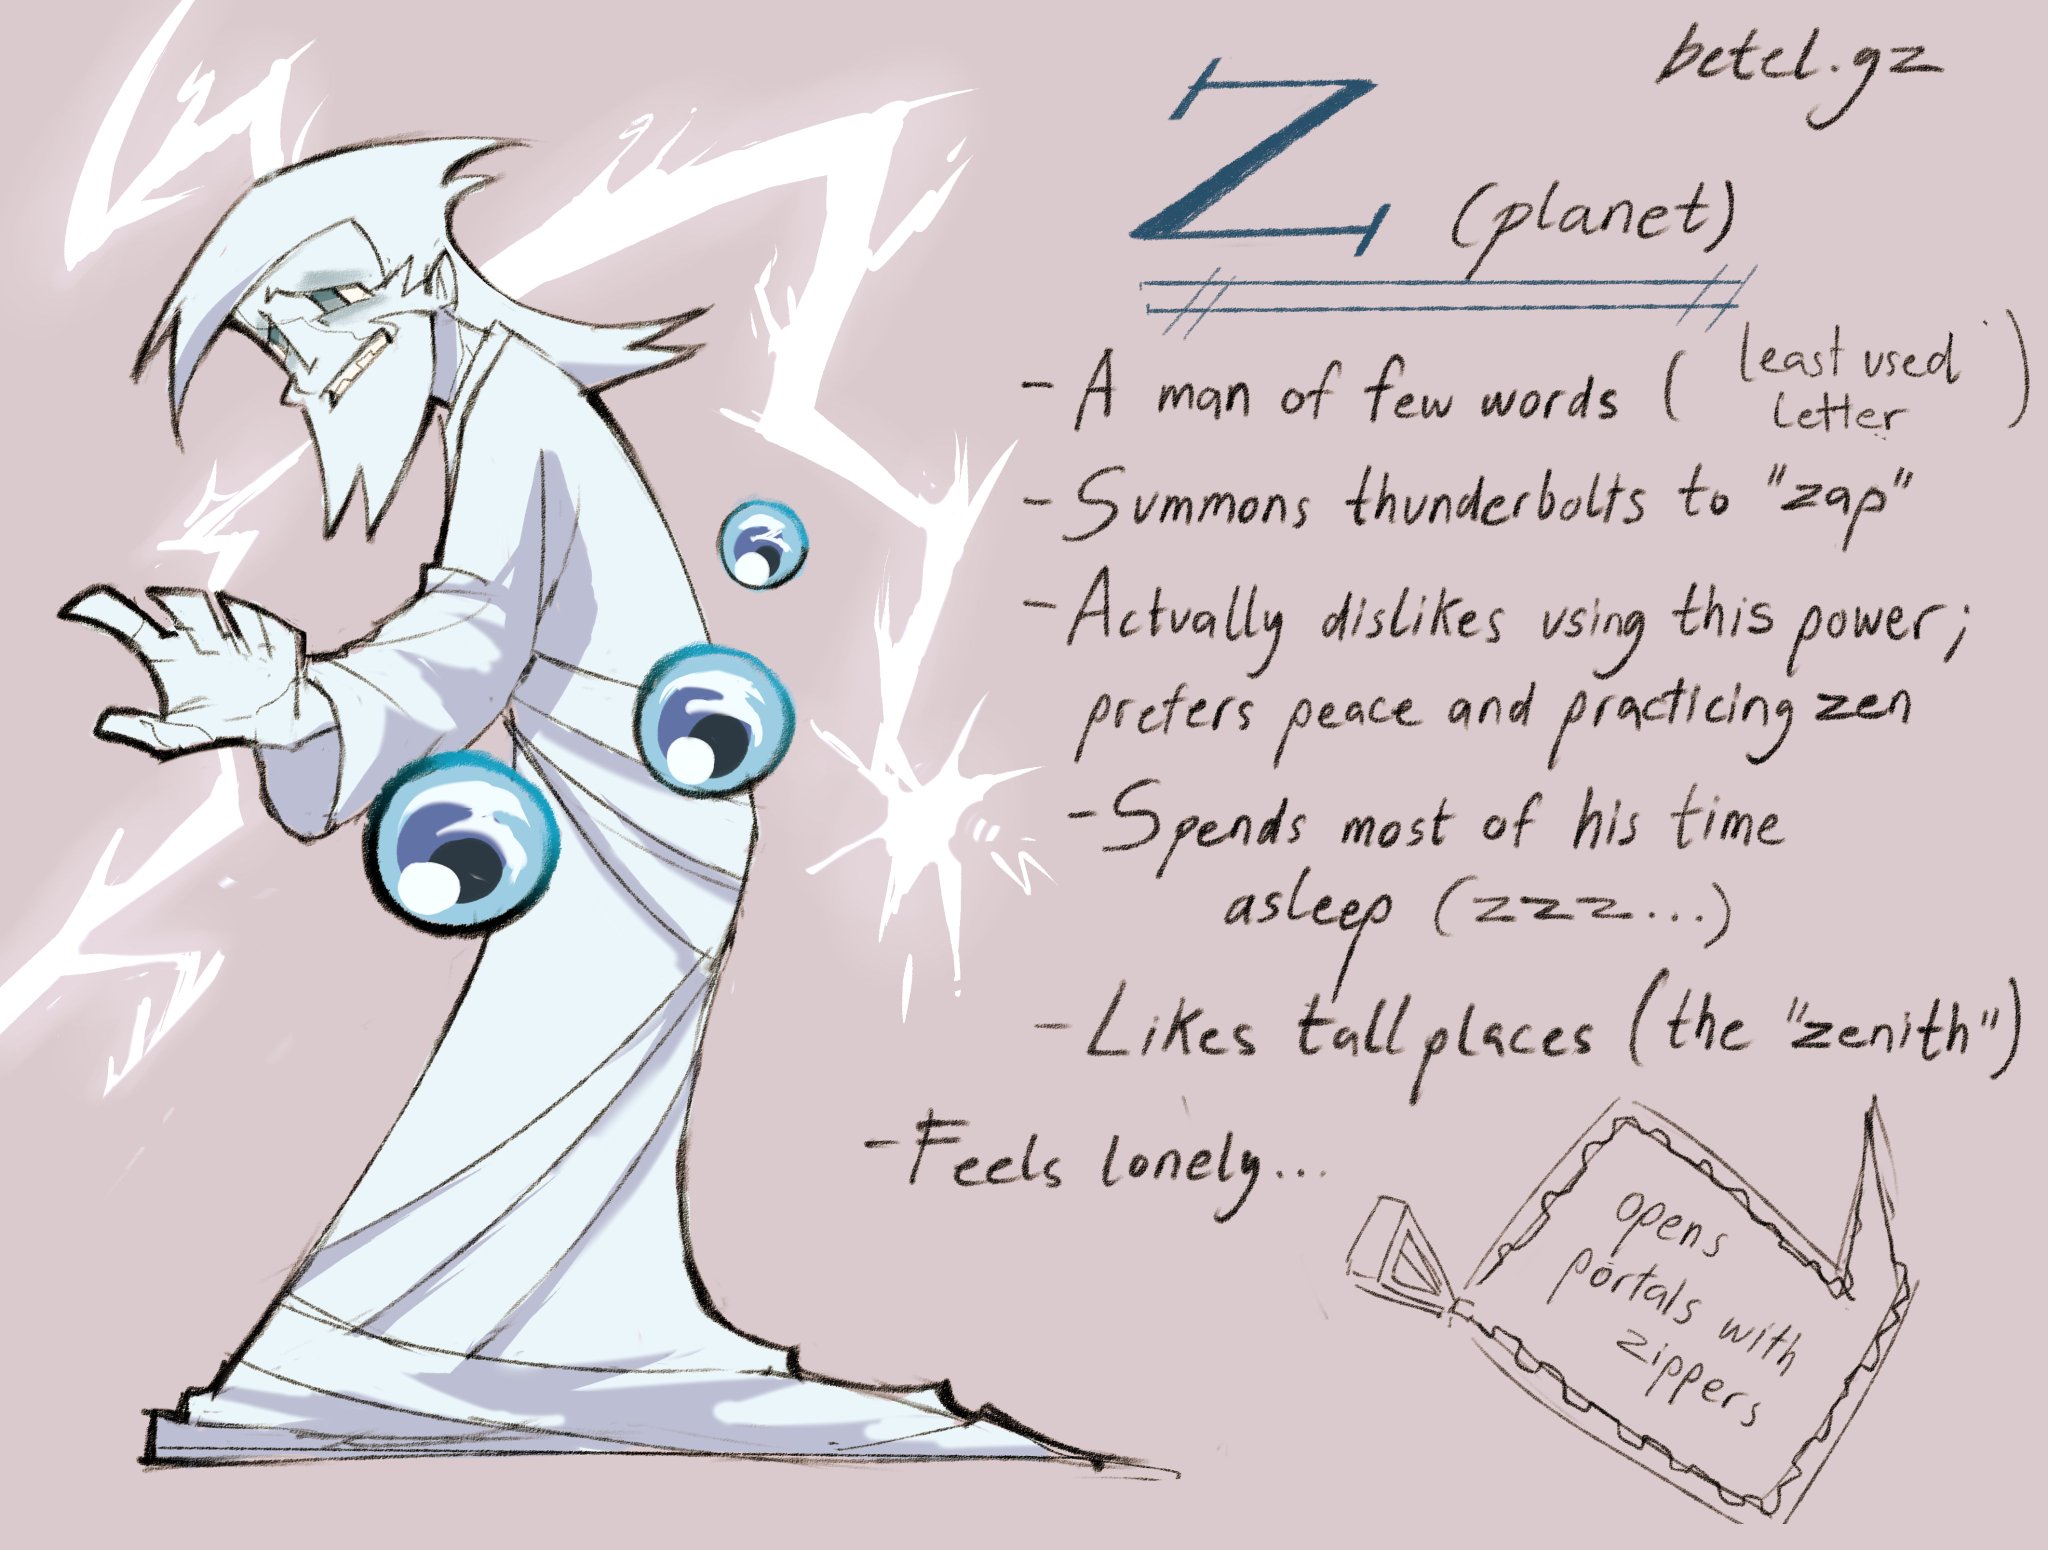 betel.gz on X: Ideas/headcanons for Z! I also learned some stuff about Z's  history; he's come from a Phoenician swordsman and sailor to a gigantic  planet #alphabetlore #alphabetfriends #digitalart   / X